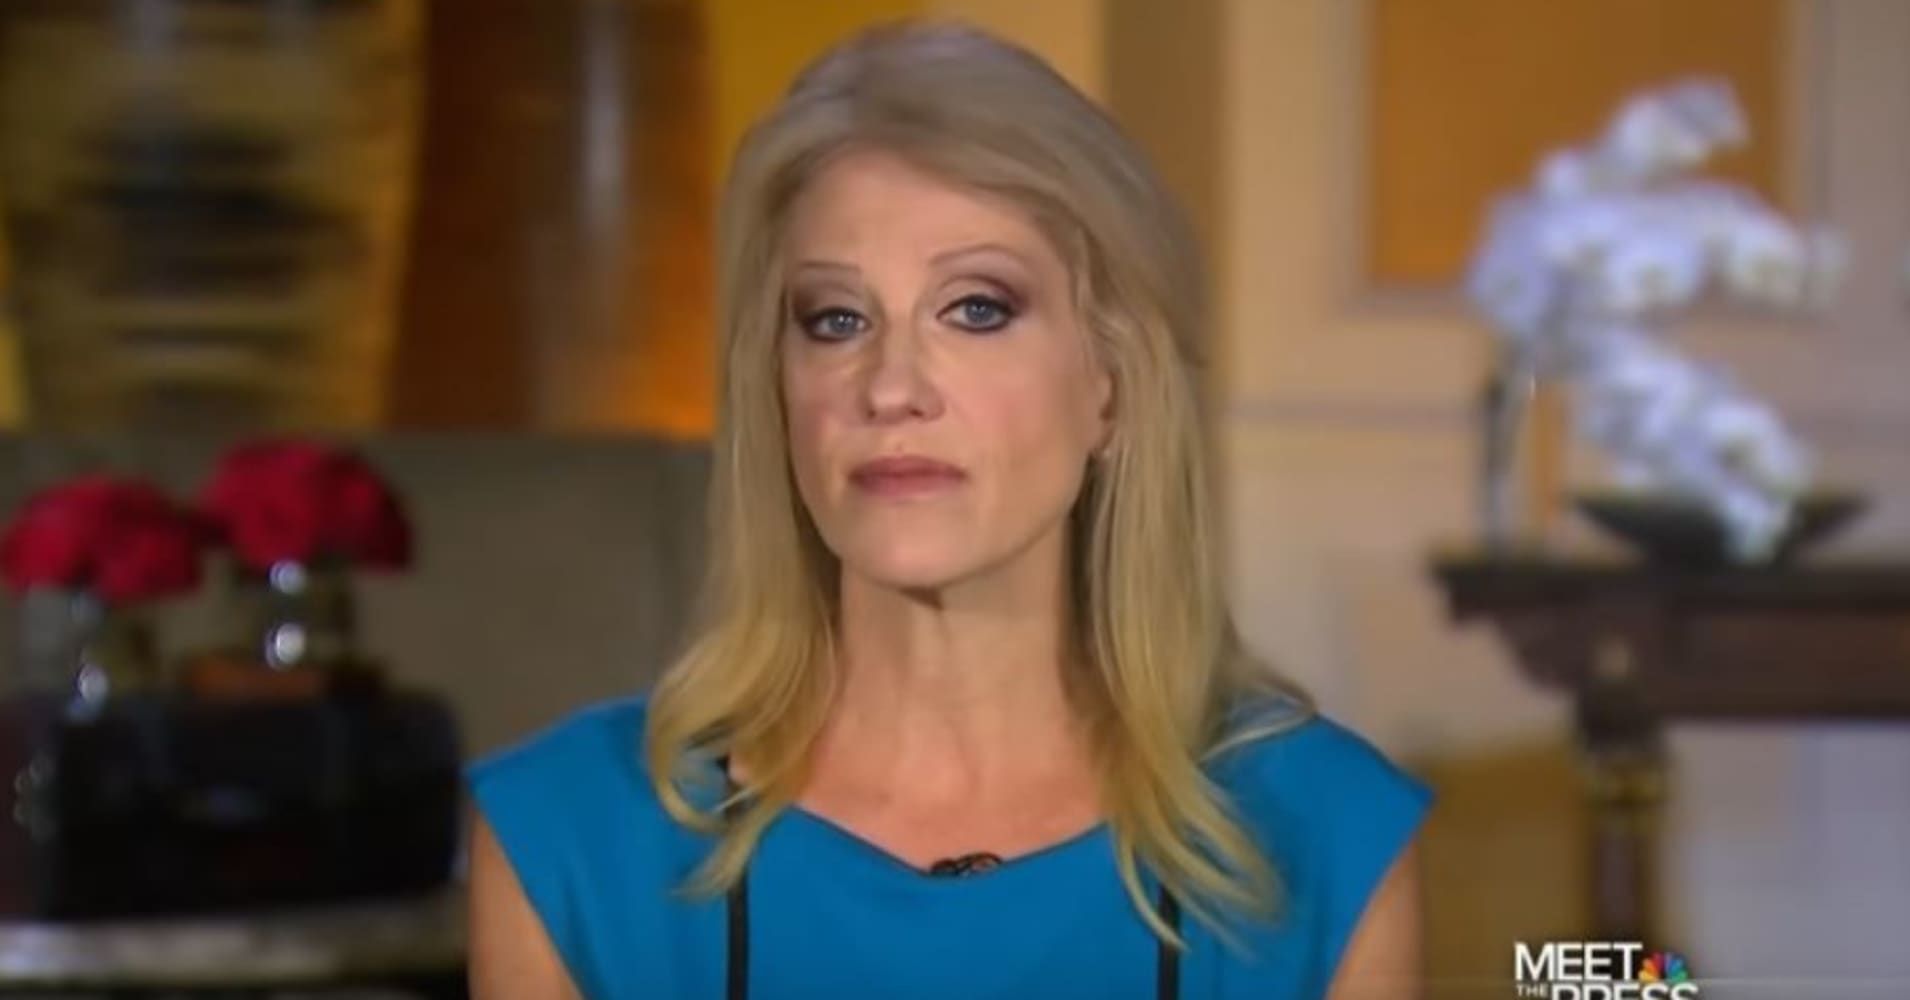 Trump 'furious' over Kellyanne Conway comments on Sunday shows about Romney: Sources